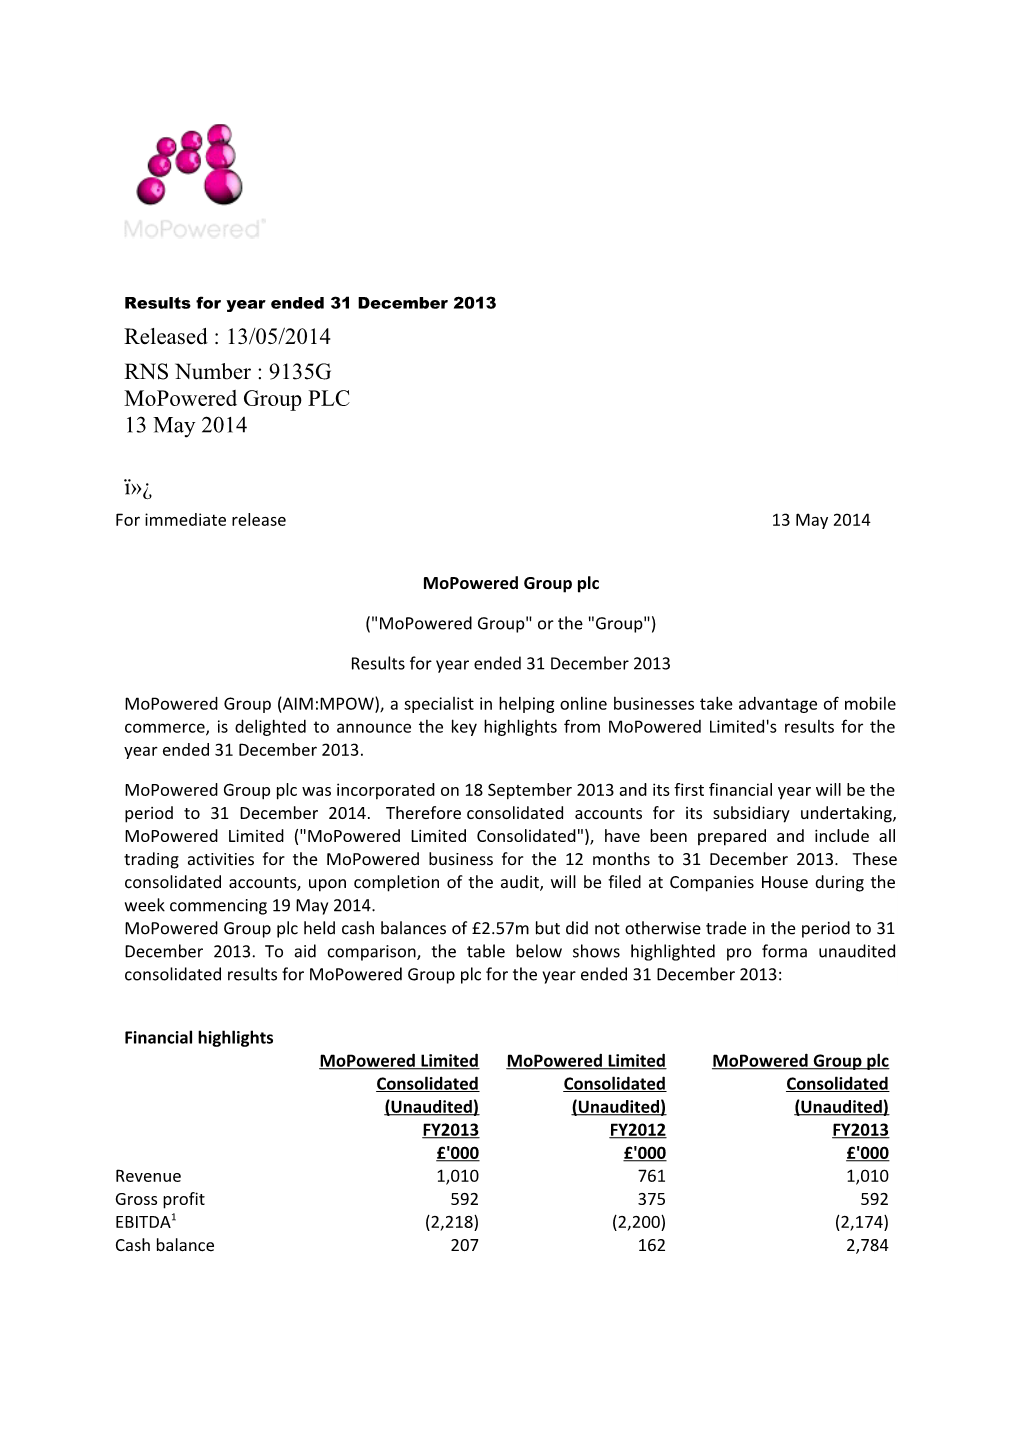 Results for Year Ended 31 December 2013